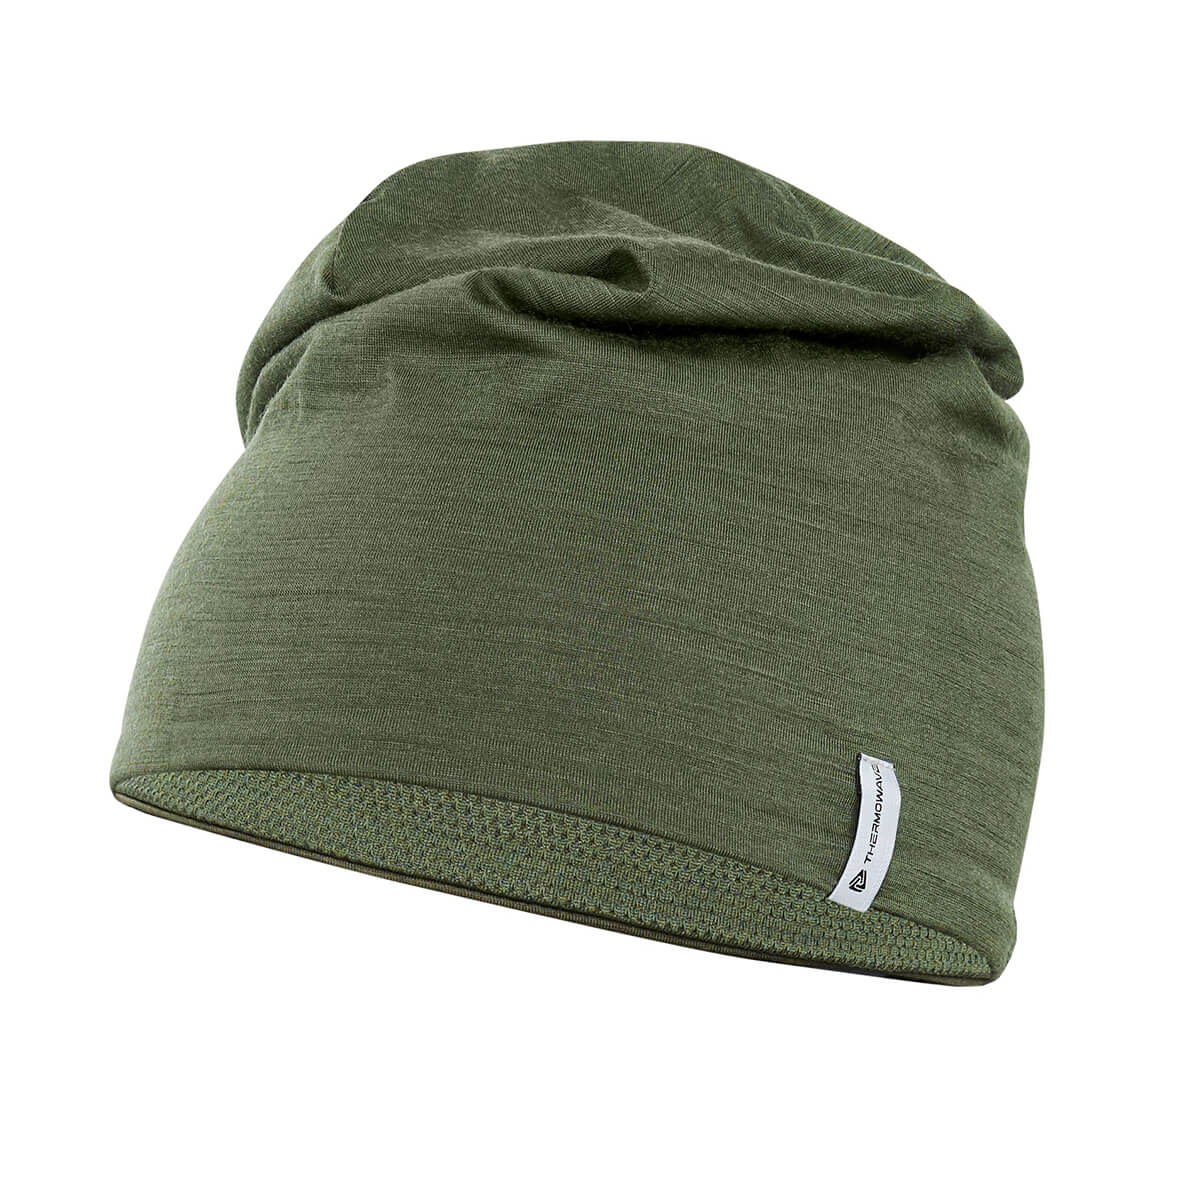 Thermowave hat baselayer (green) - Winter Hunting Clothing